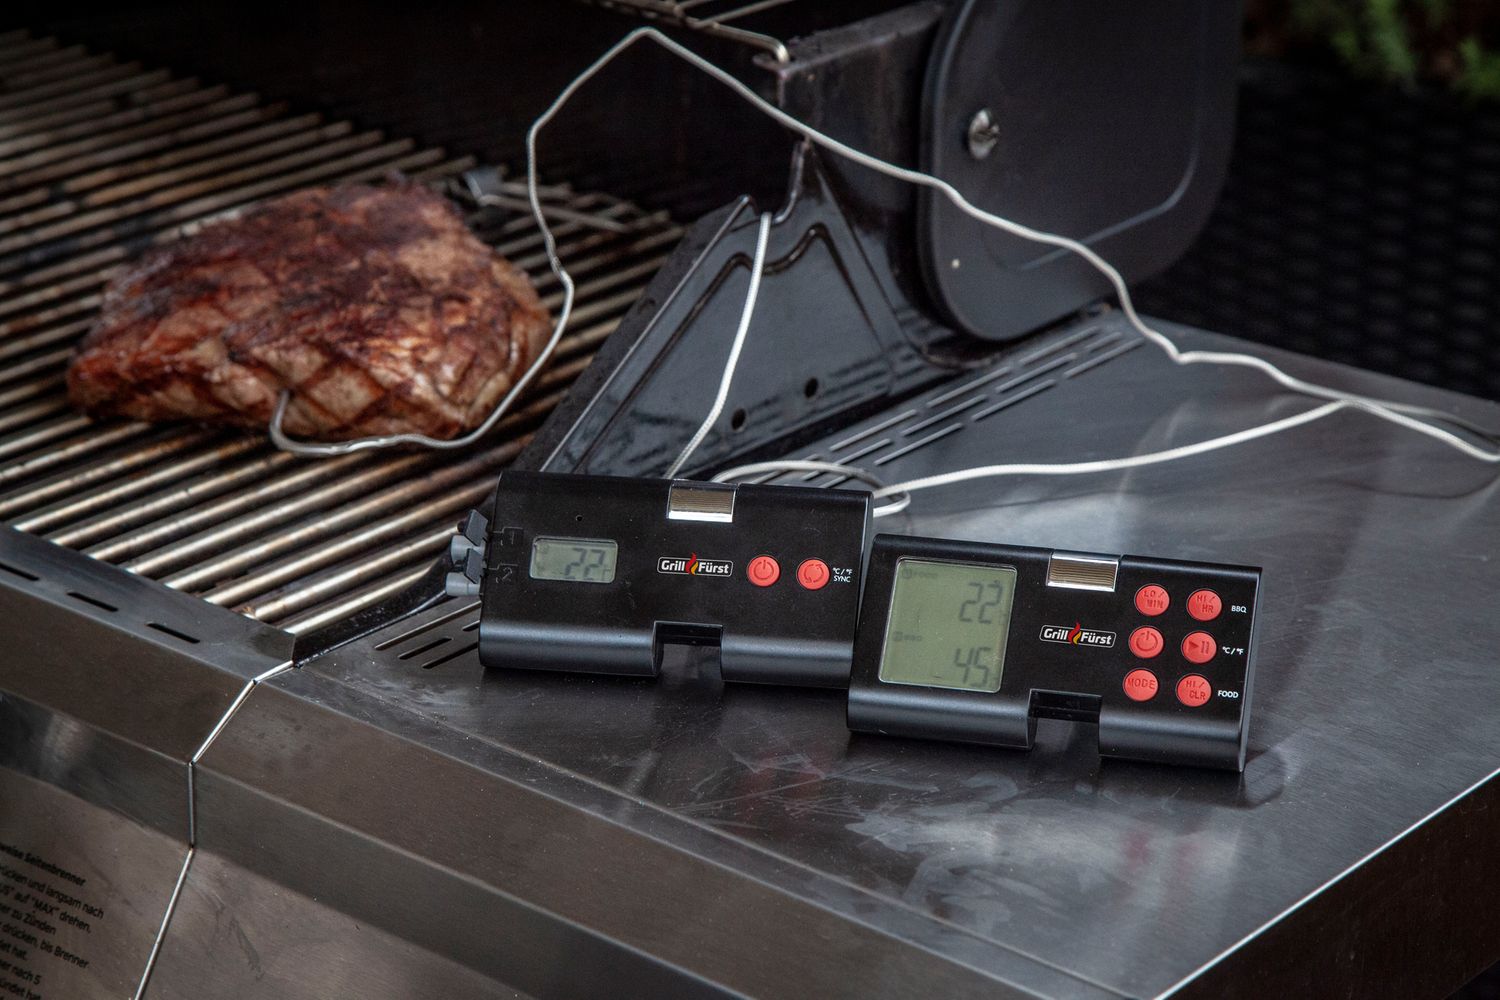 Digital Funk Grillthermometer Dual 1 Fühler BBQ Grill Food Fleisch Thermometer 